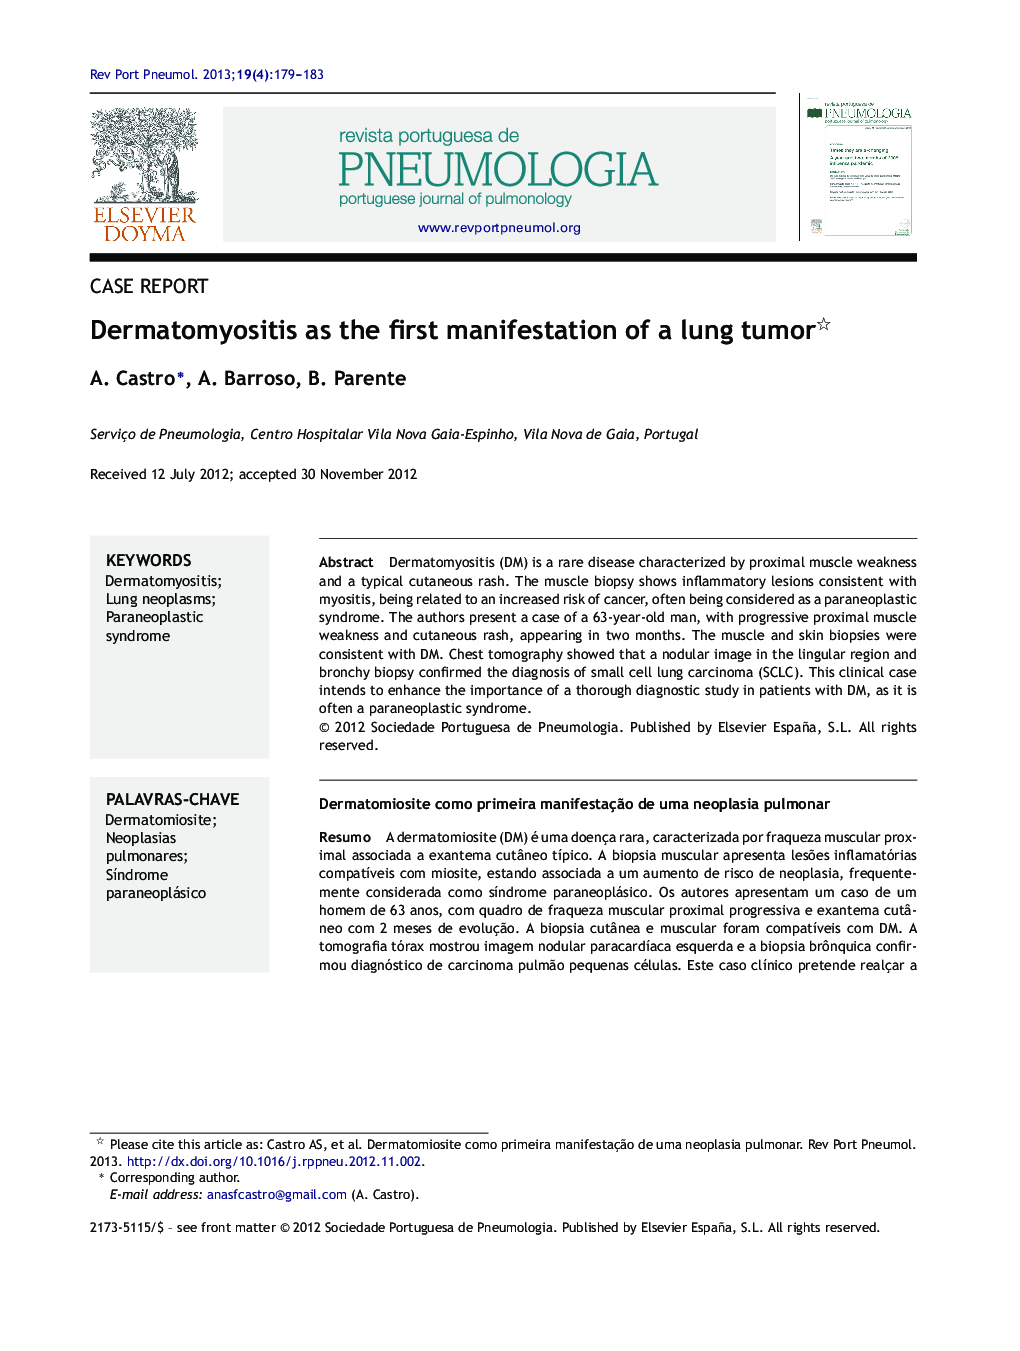 Dermatomyositis as the first manifestation of a lung tumor 